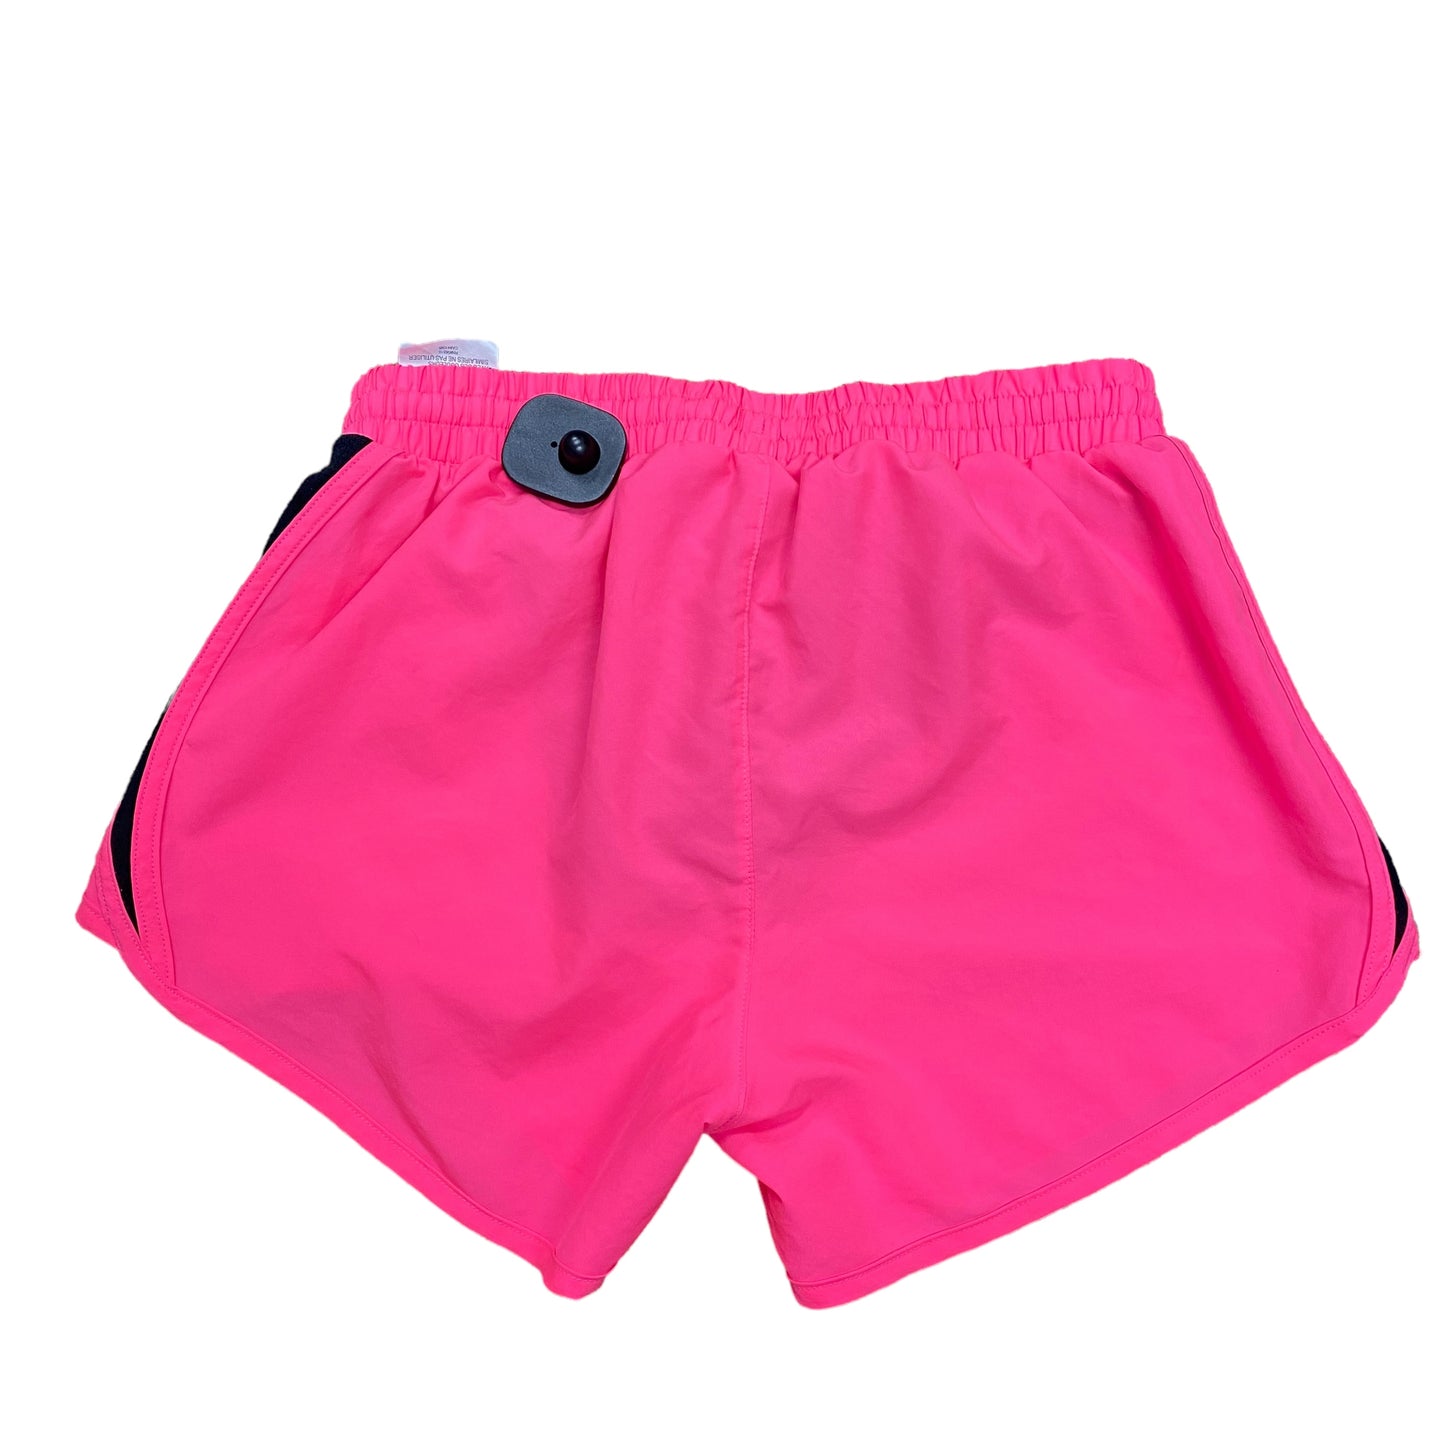 Athletic Shorts By Under Armour  Size: Xs